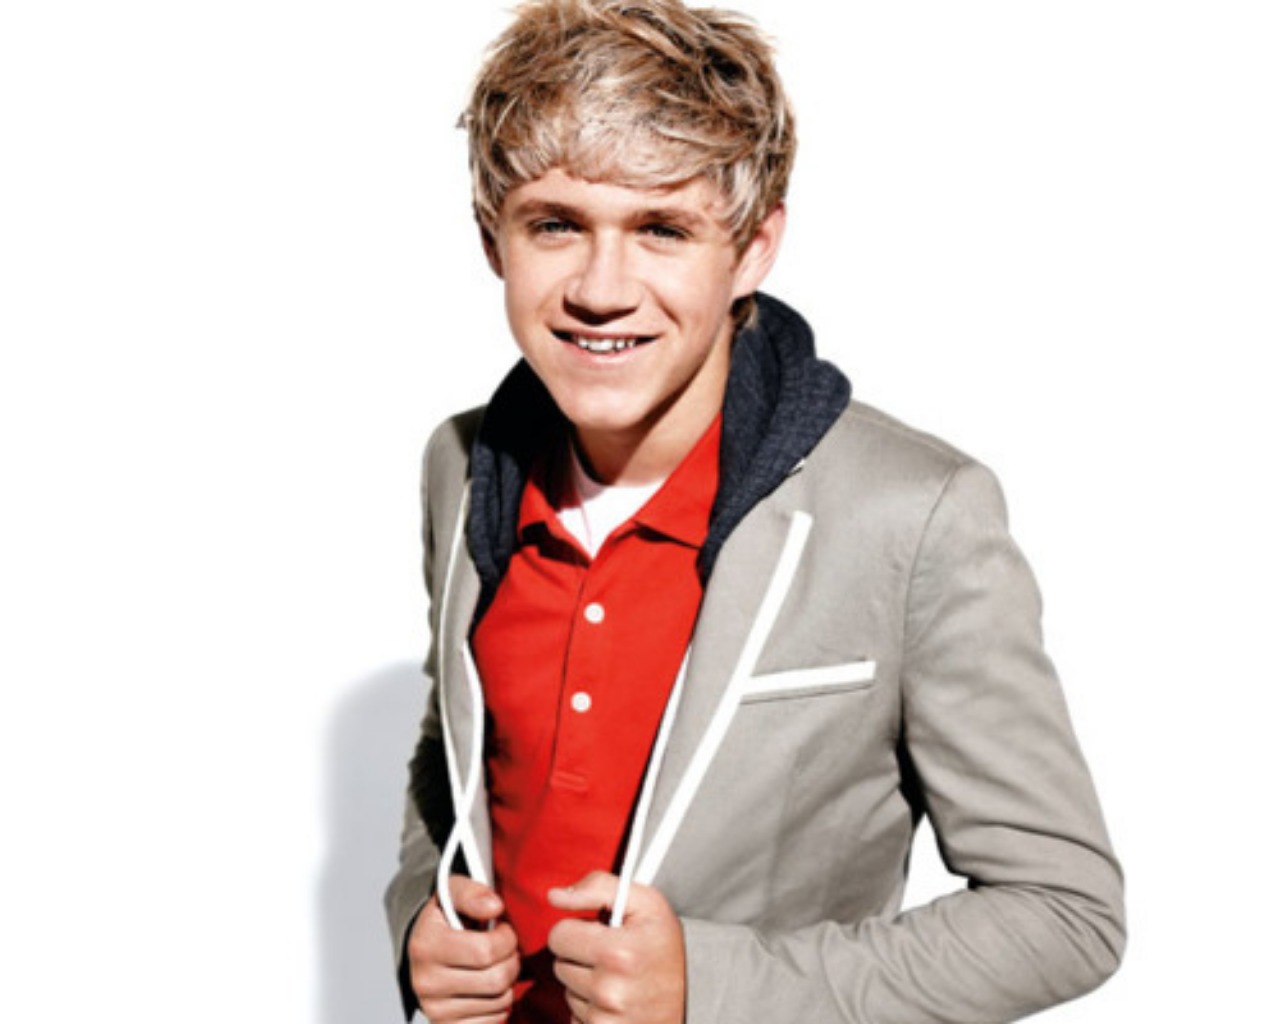 http://images5.fanpop.com/image/photos/29400000/-Niall-Horan-one-direction-29445880-1280-1024.jpg